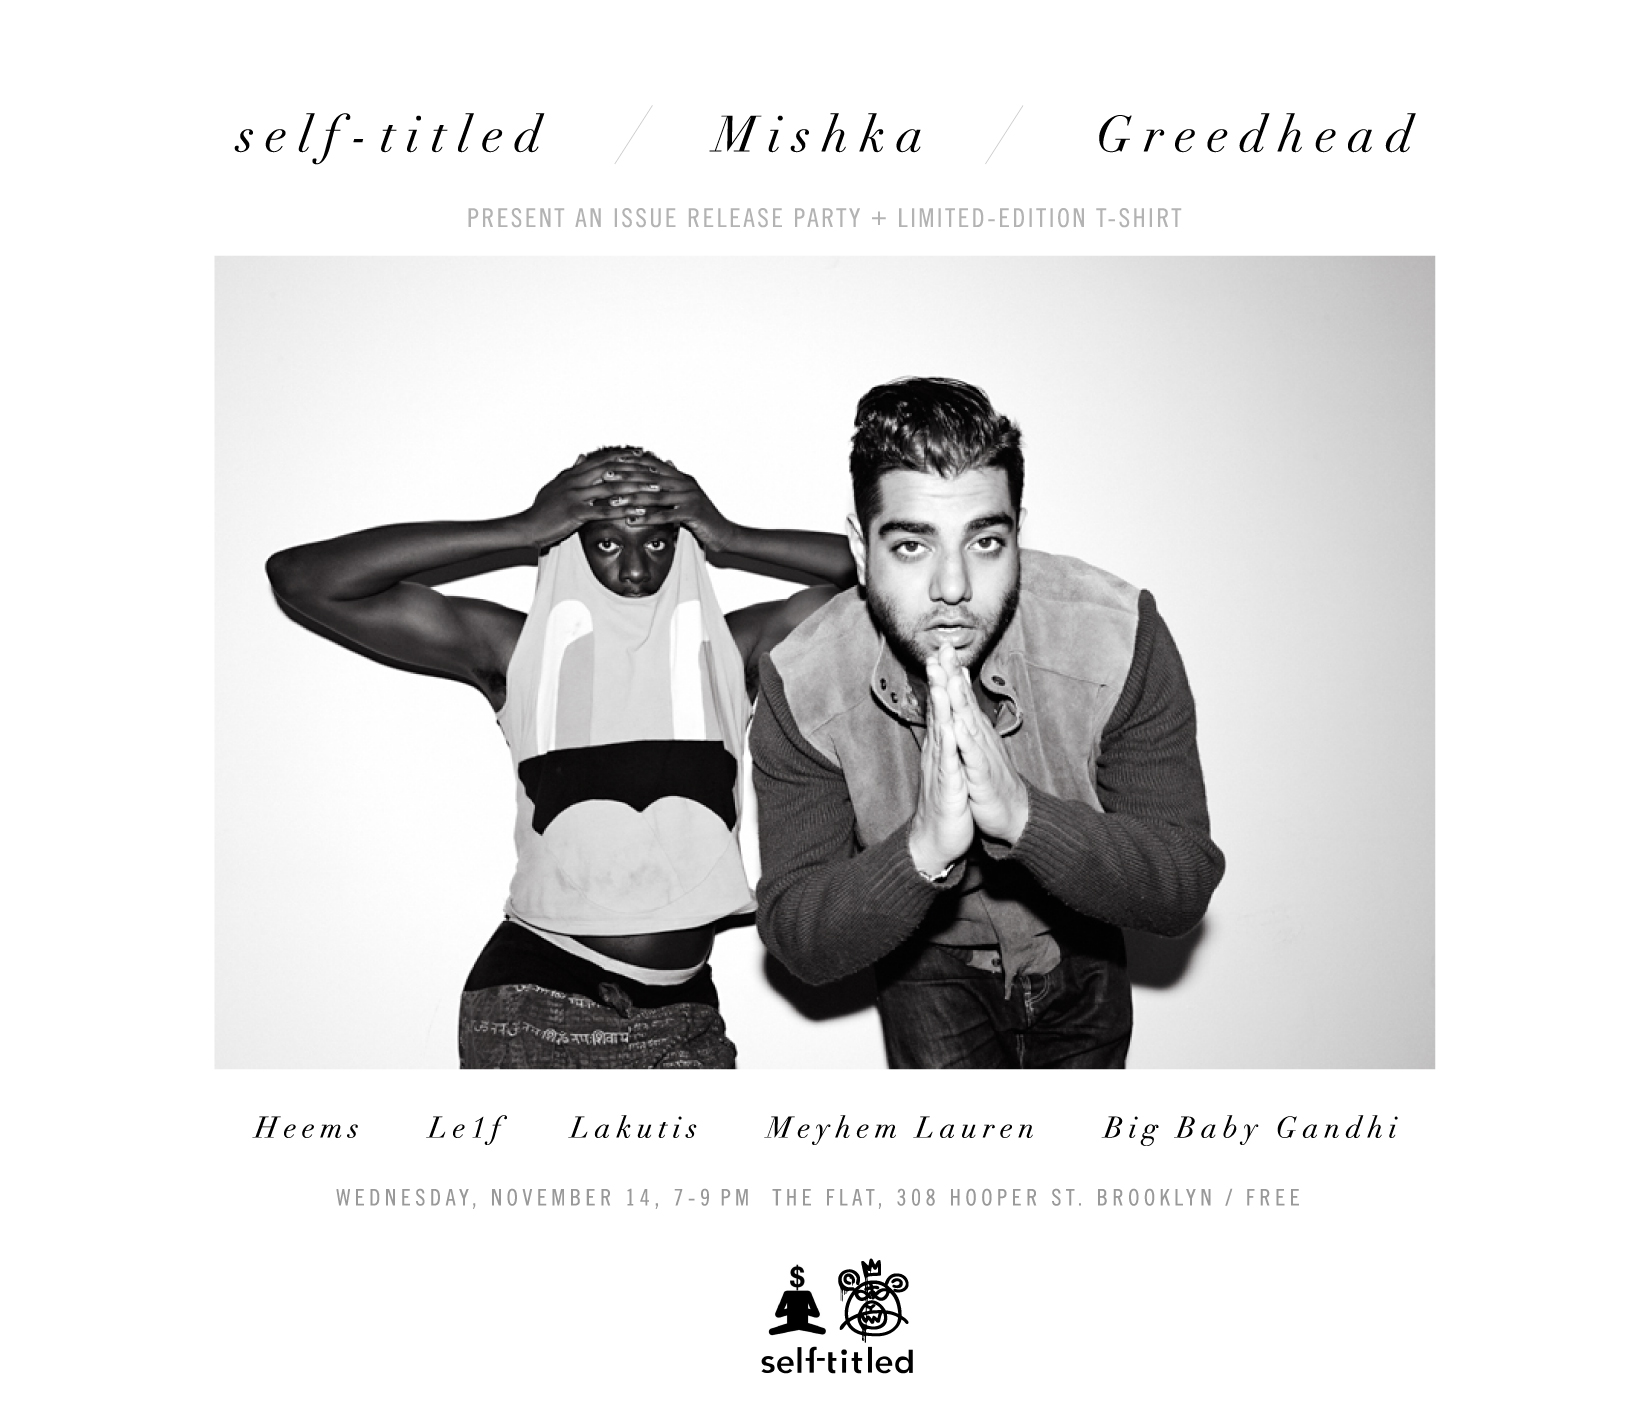 A flyer for the Mishka x Greedhead x self-titled party